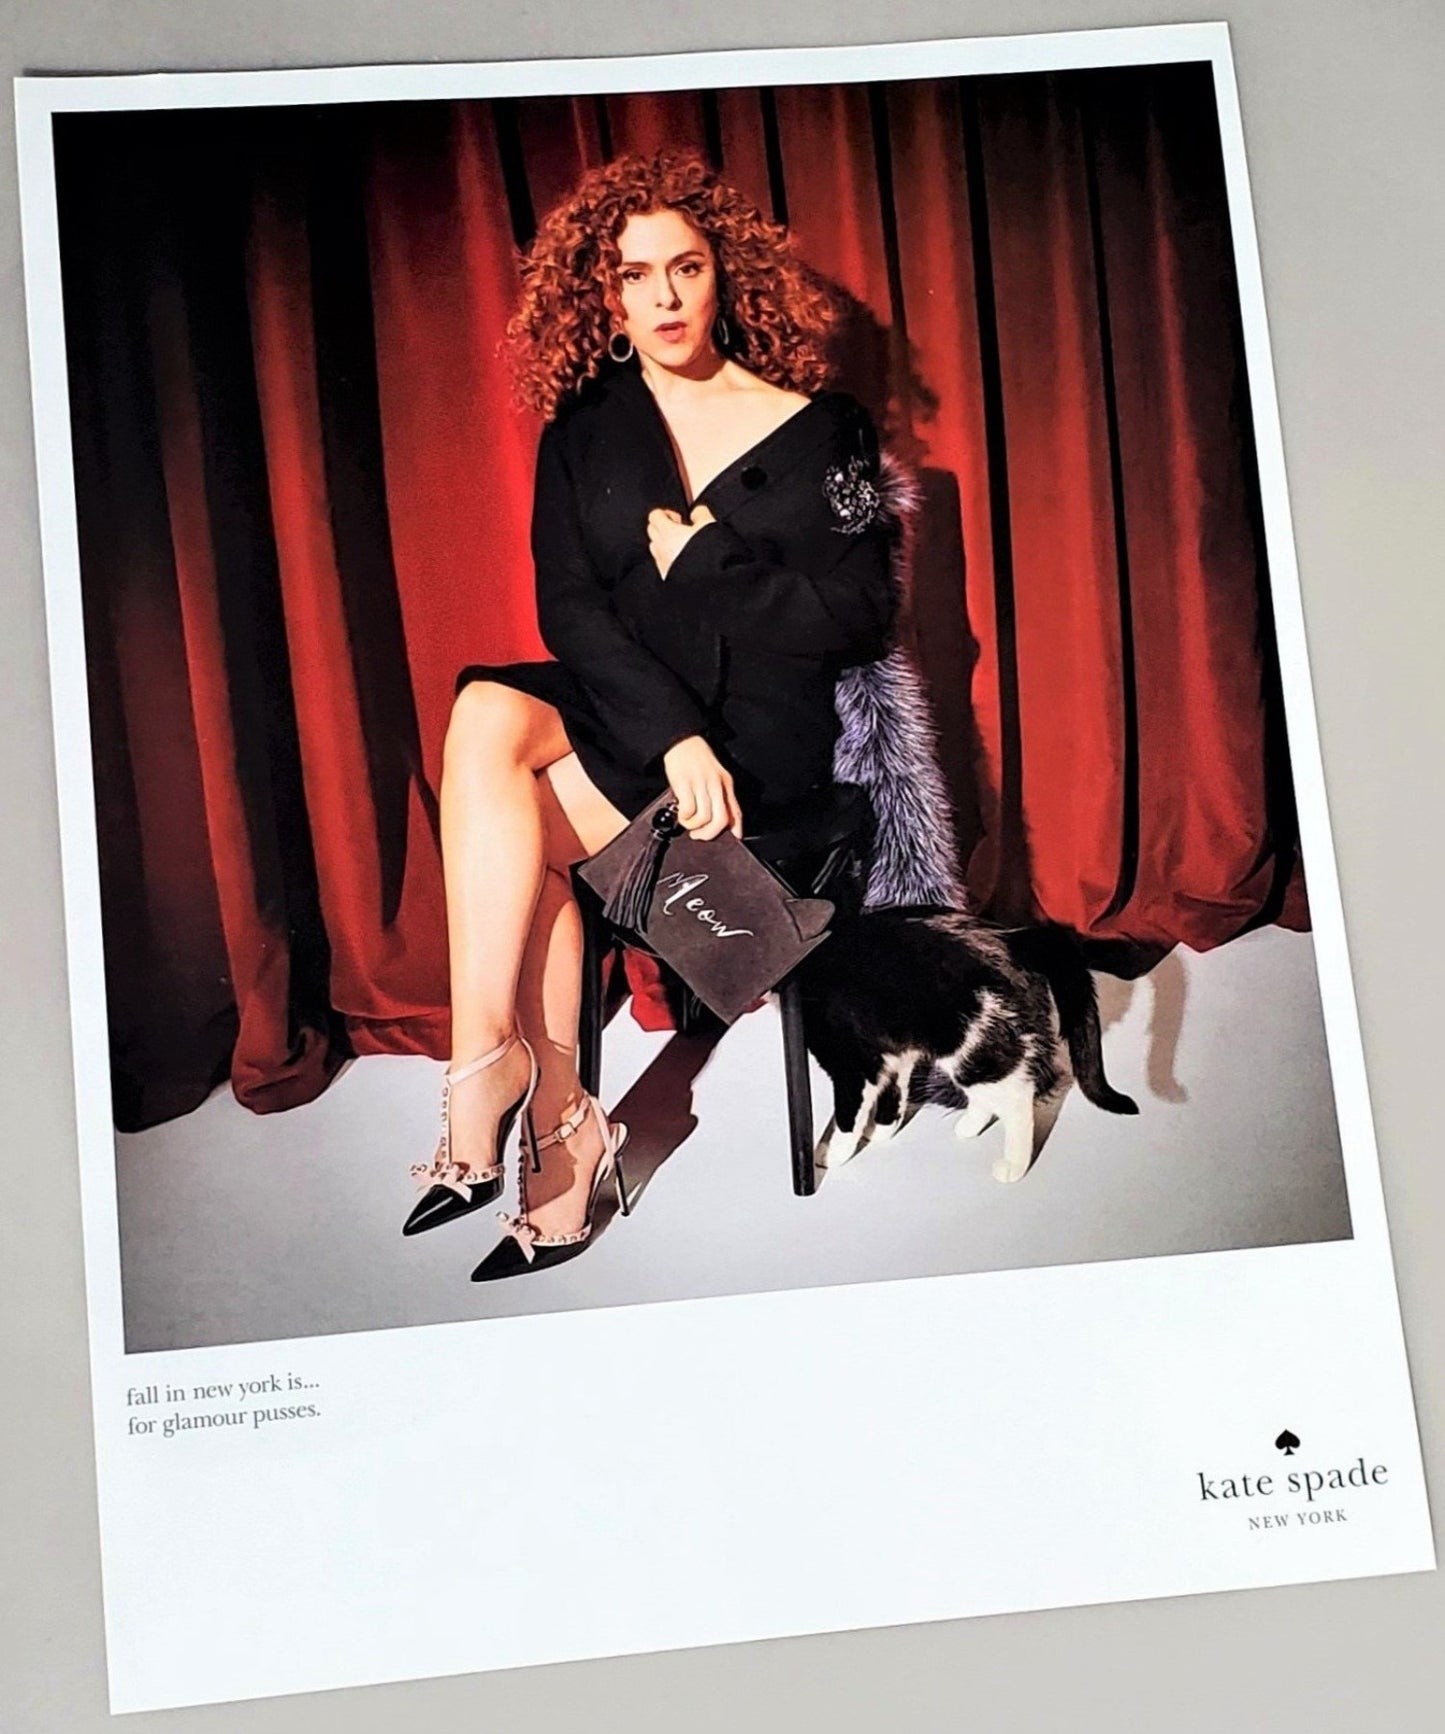 Bernadette Peters for Kate Spade photograph advertisement page featured in September 2016 Vogue magazine